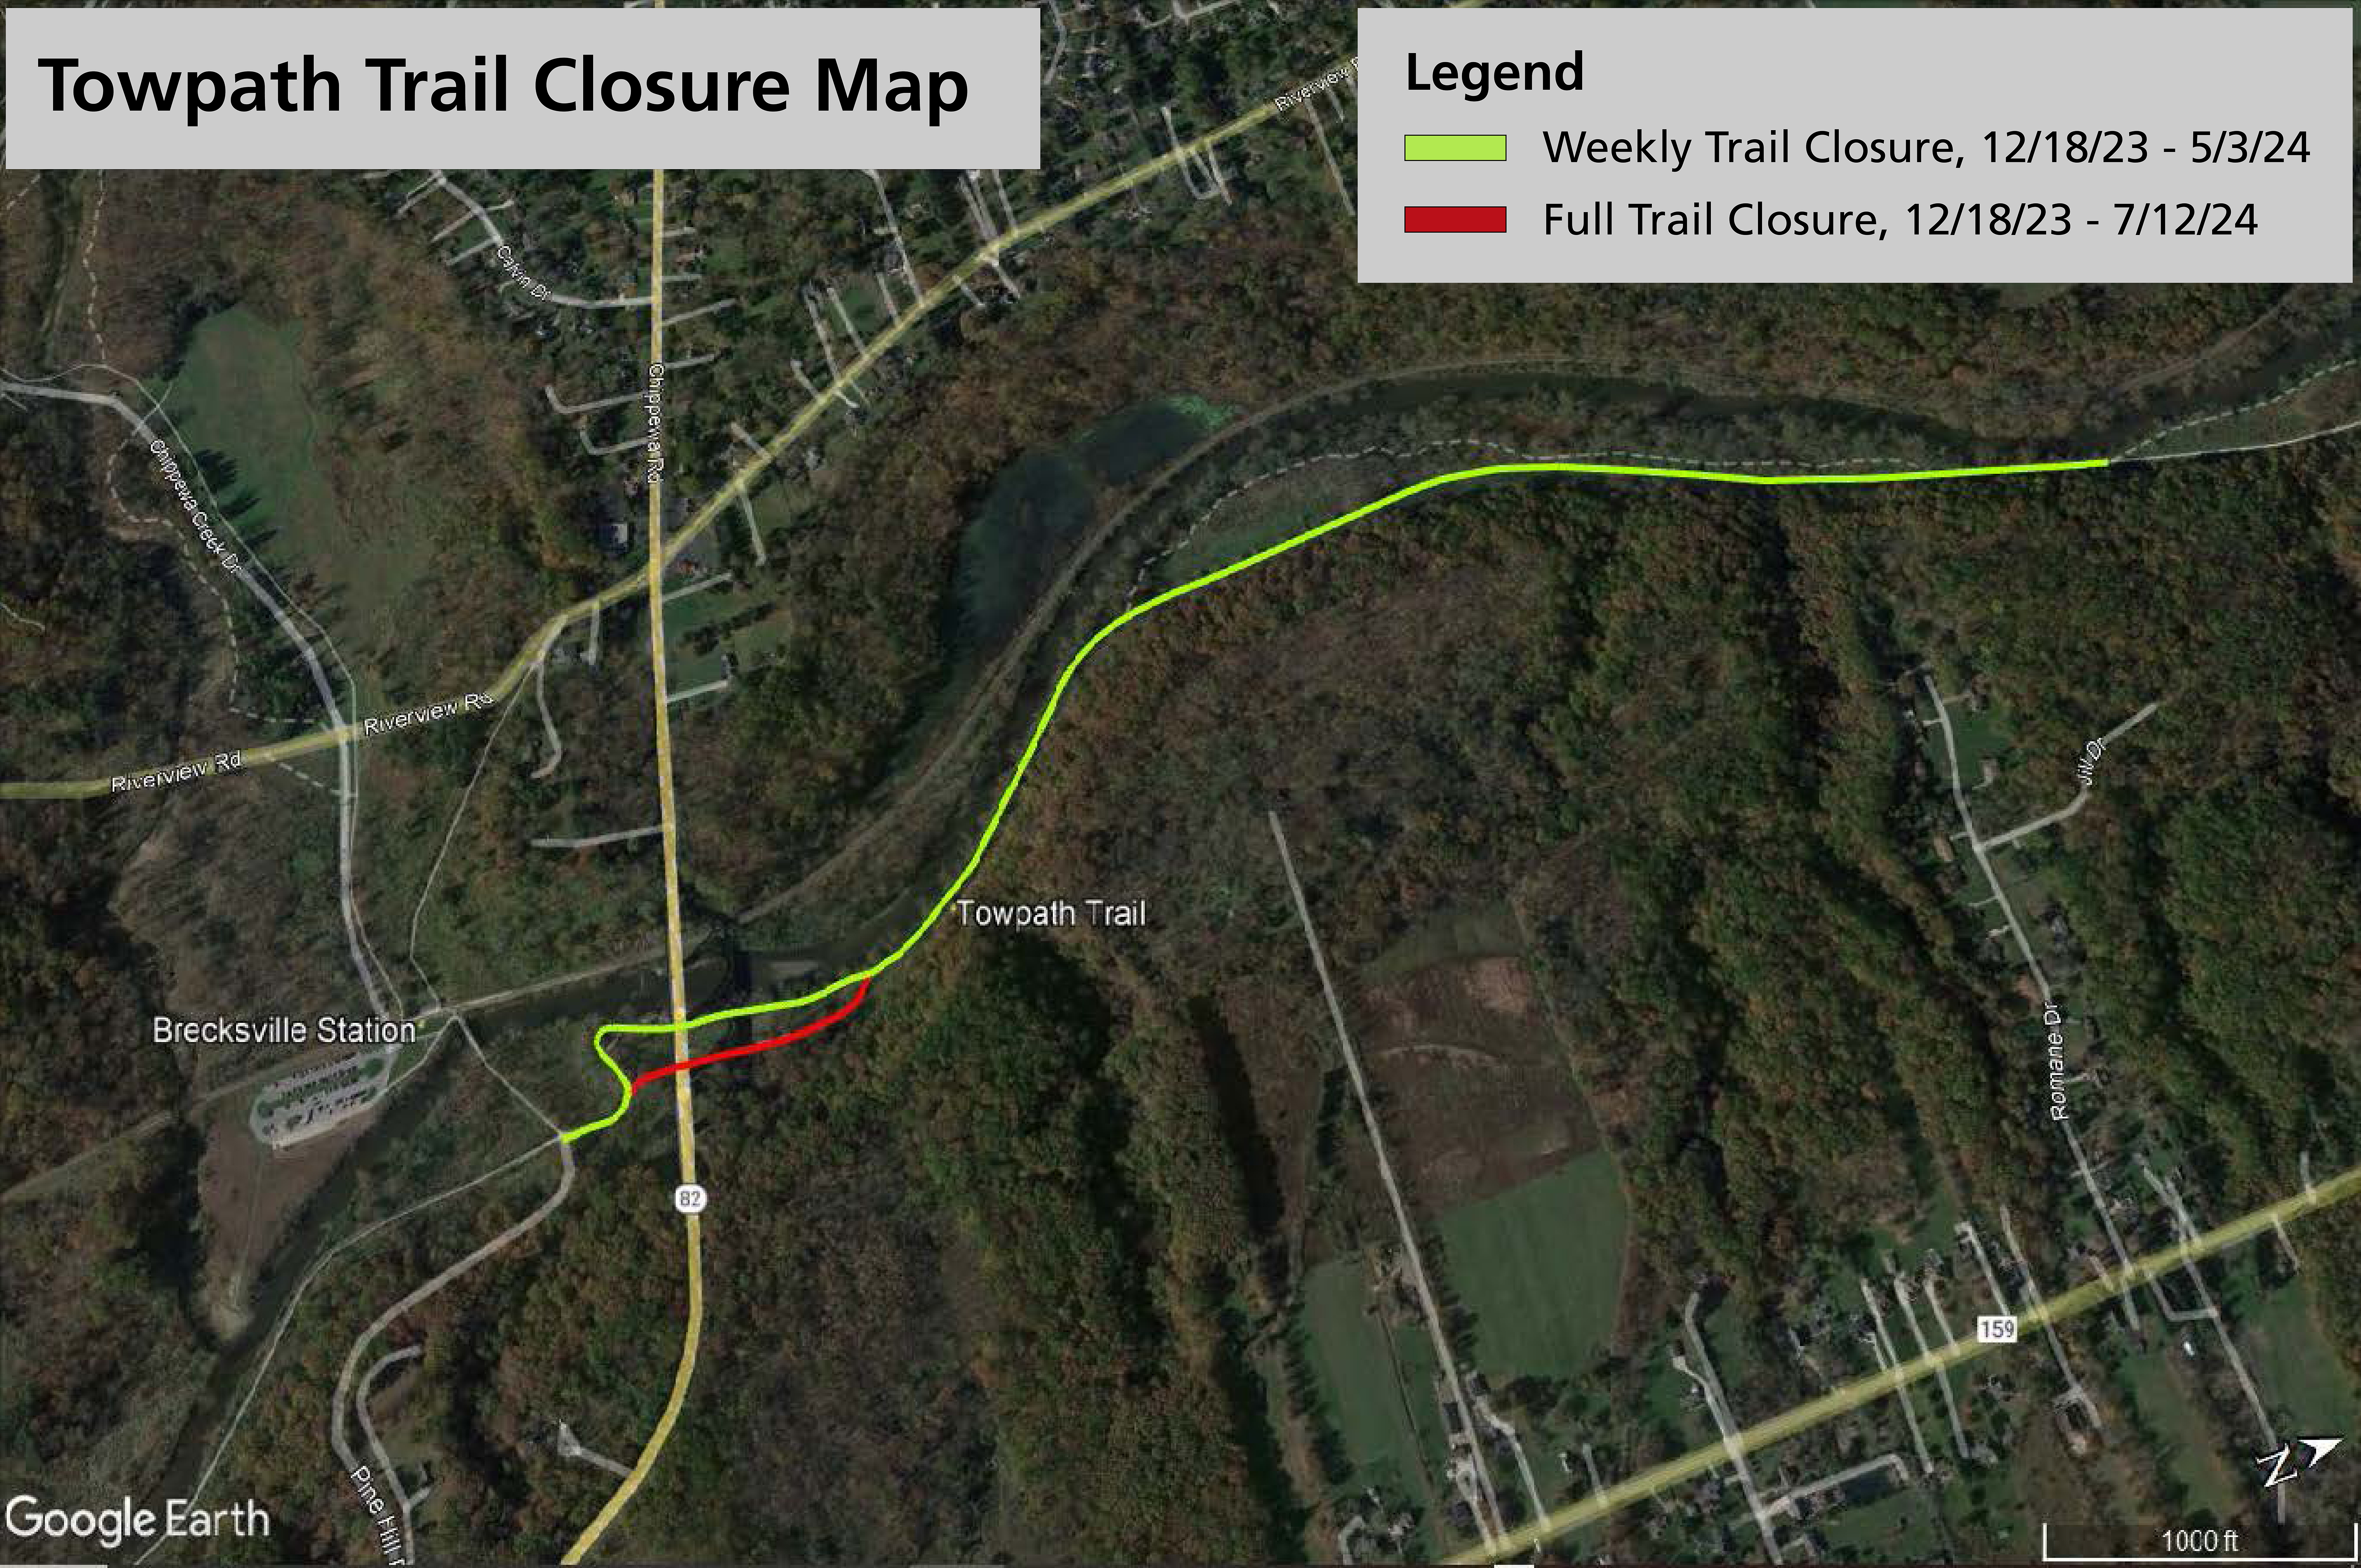 Aerial photo of a mostly forested river valley and a bright green line showing a trail closure; text reads "Towpath Trail Closure Map" and "Legend: green = weekly trail closure, 12/18/23-5/3/24."